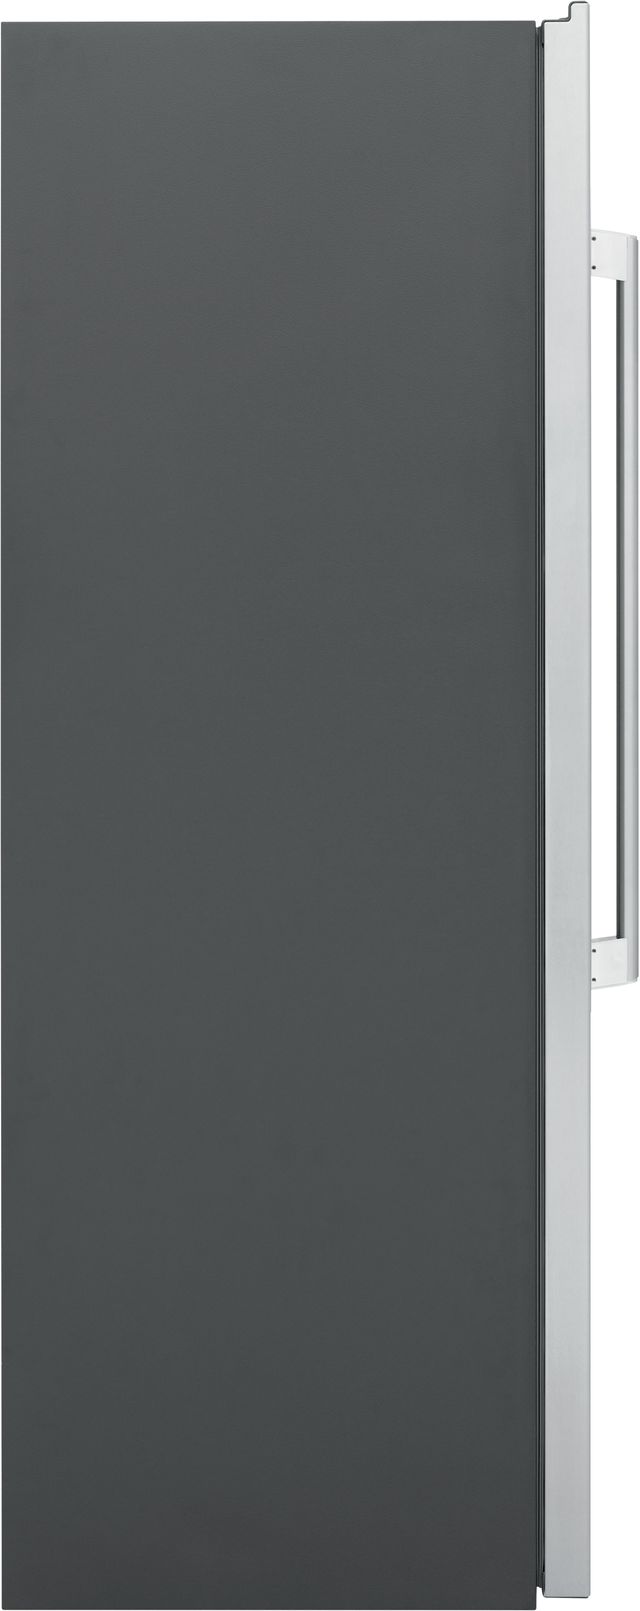 Electrolux 19 Cu. Ft. Stainless Steel Column Refrigerator 4